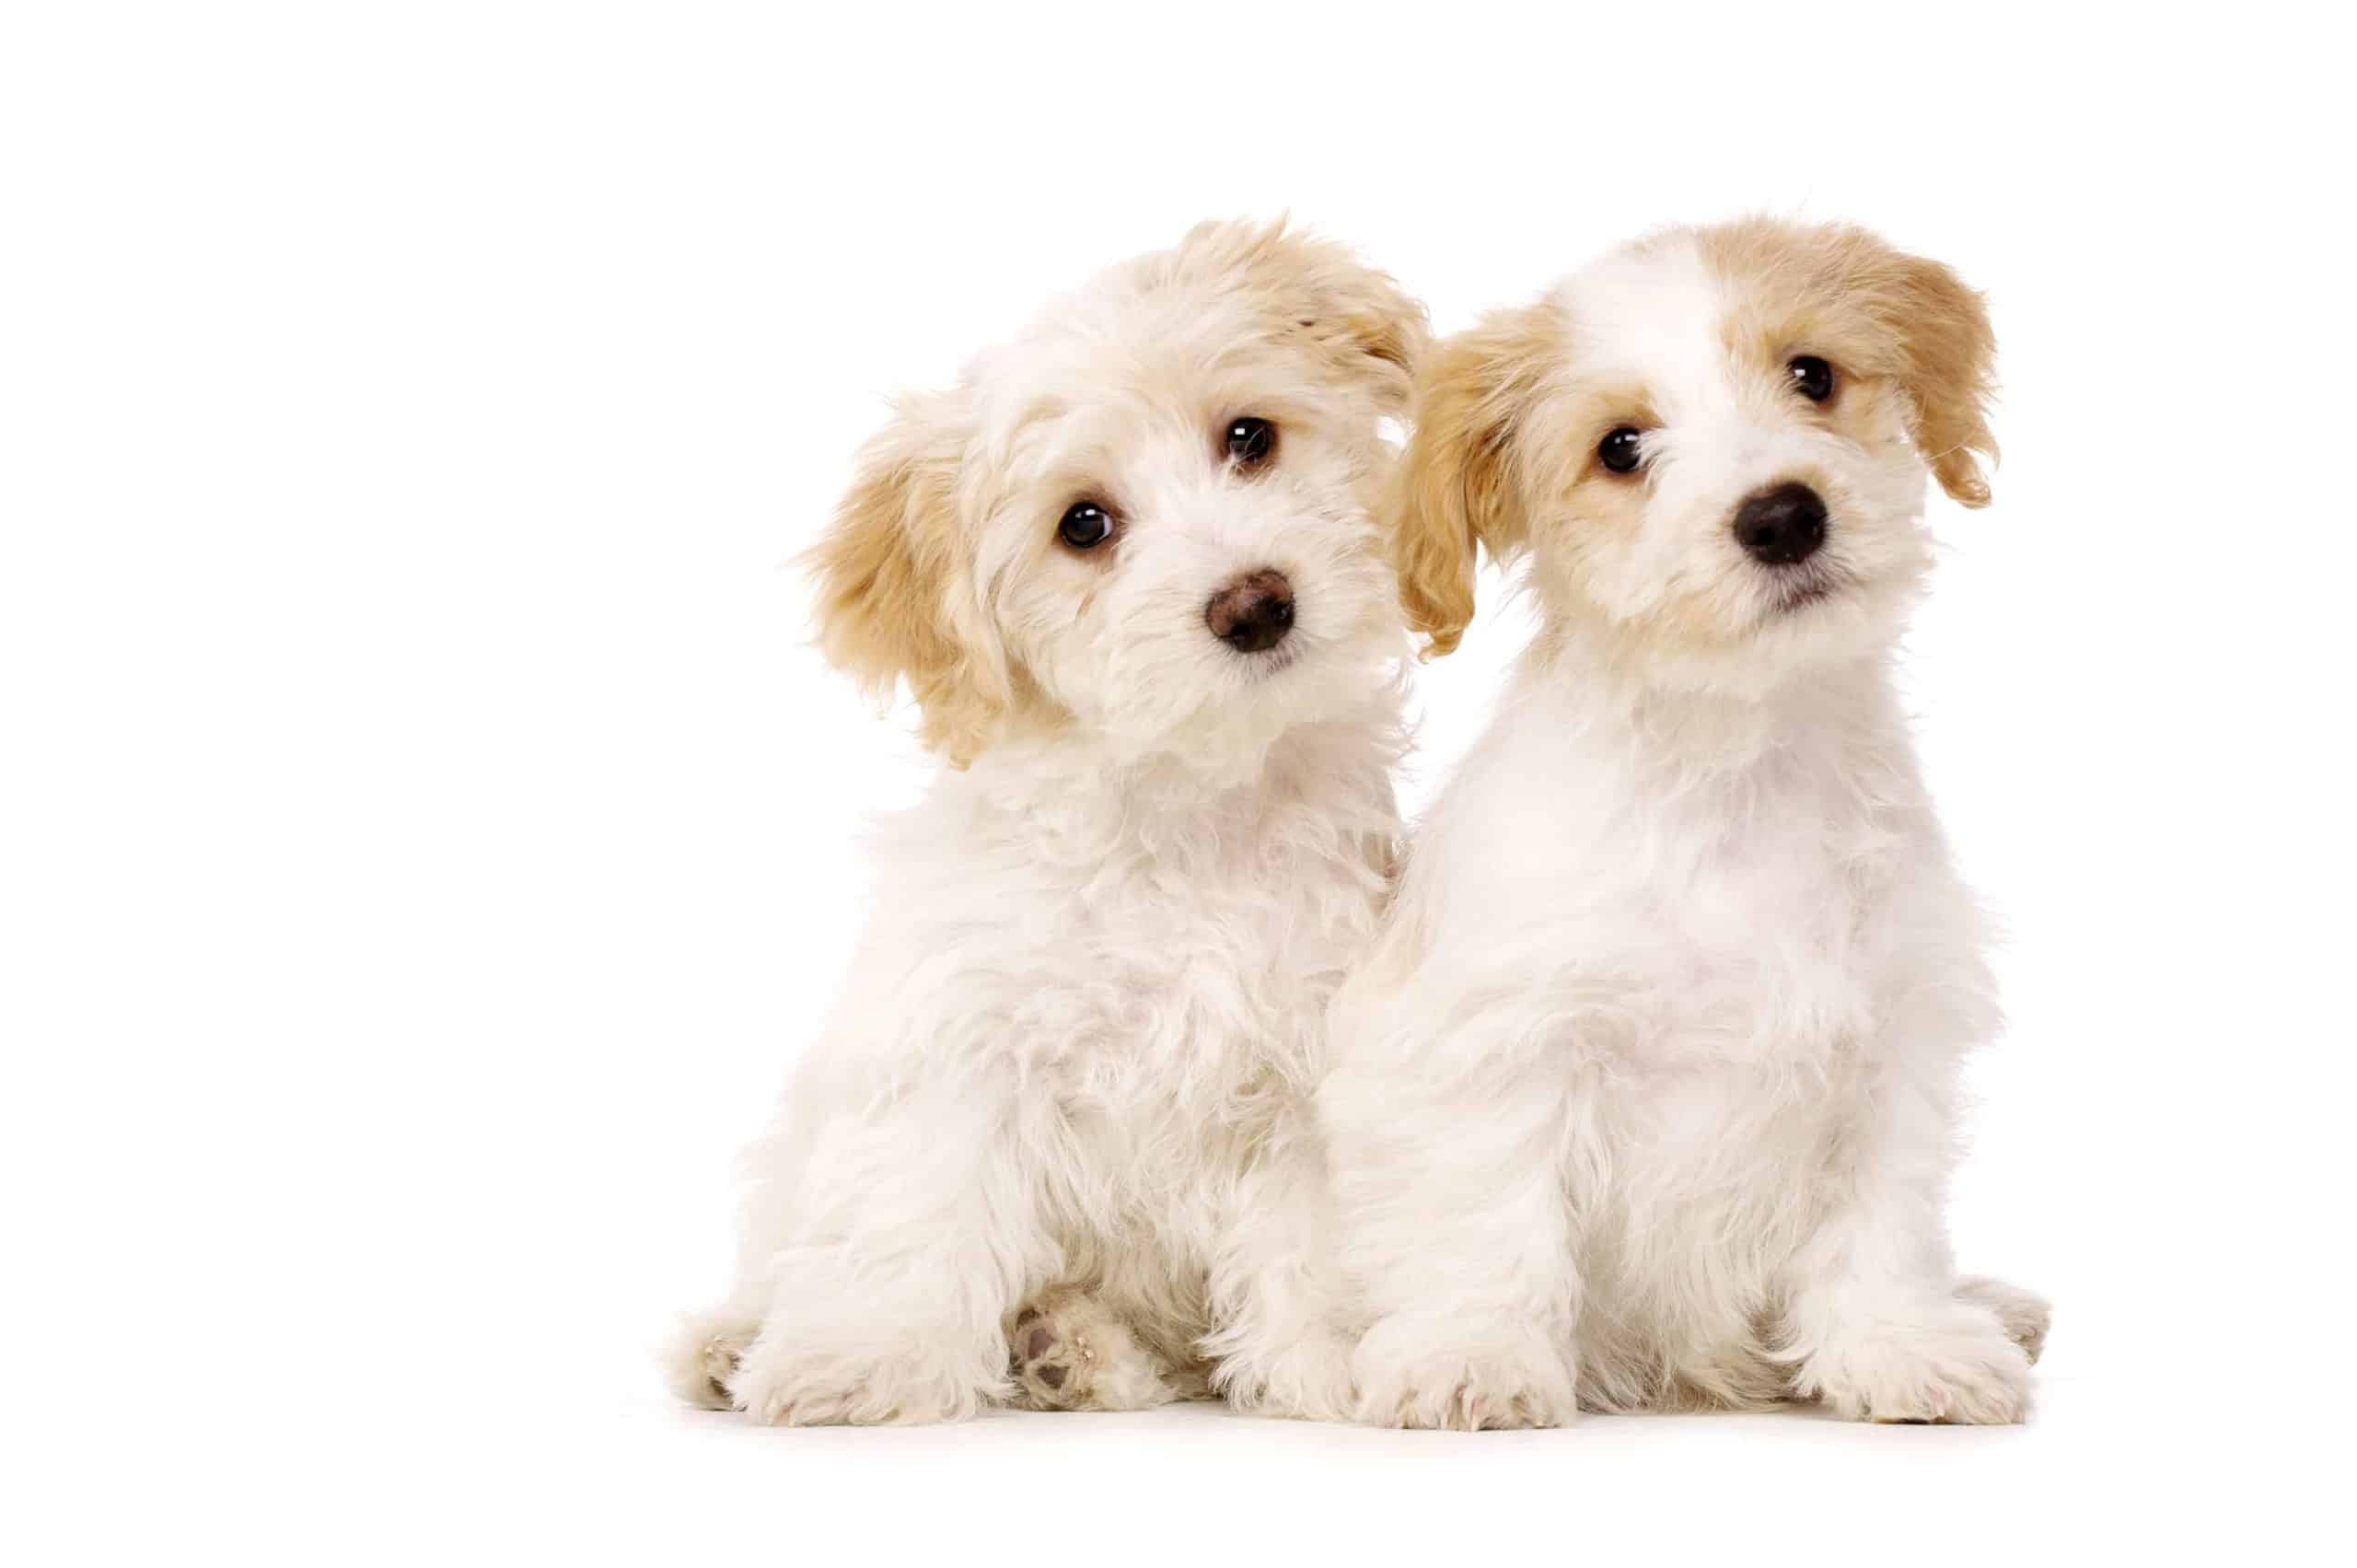 Jack Russell Terrier and Poodle mix on white background. The Jackapoo is a mix of the intelligent Toy Poodle and the active Jack Russell Terrier.